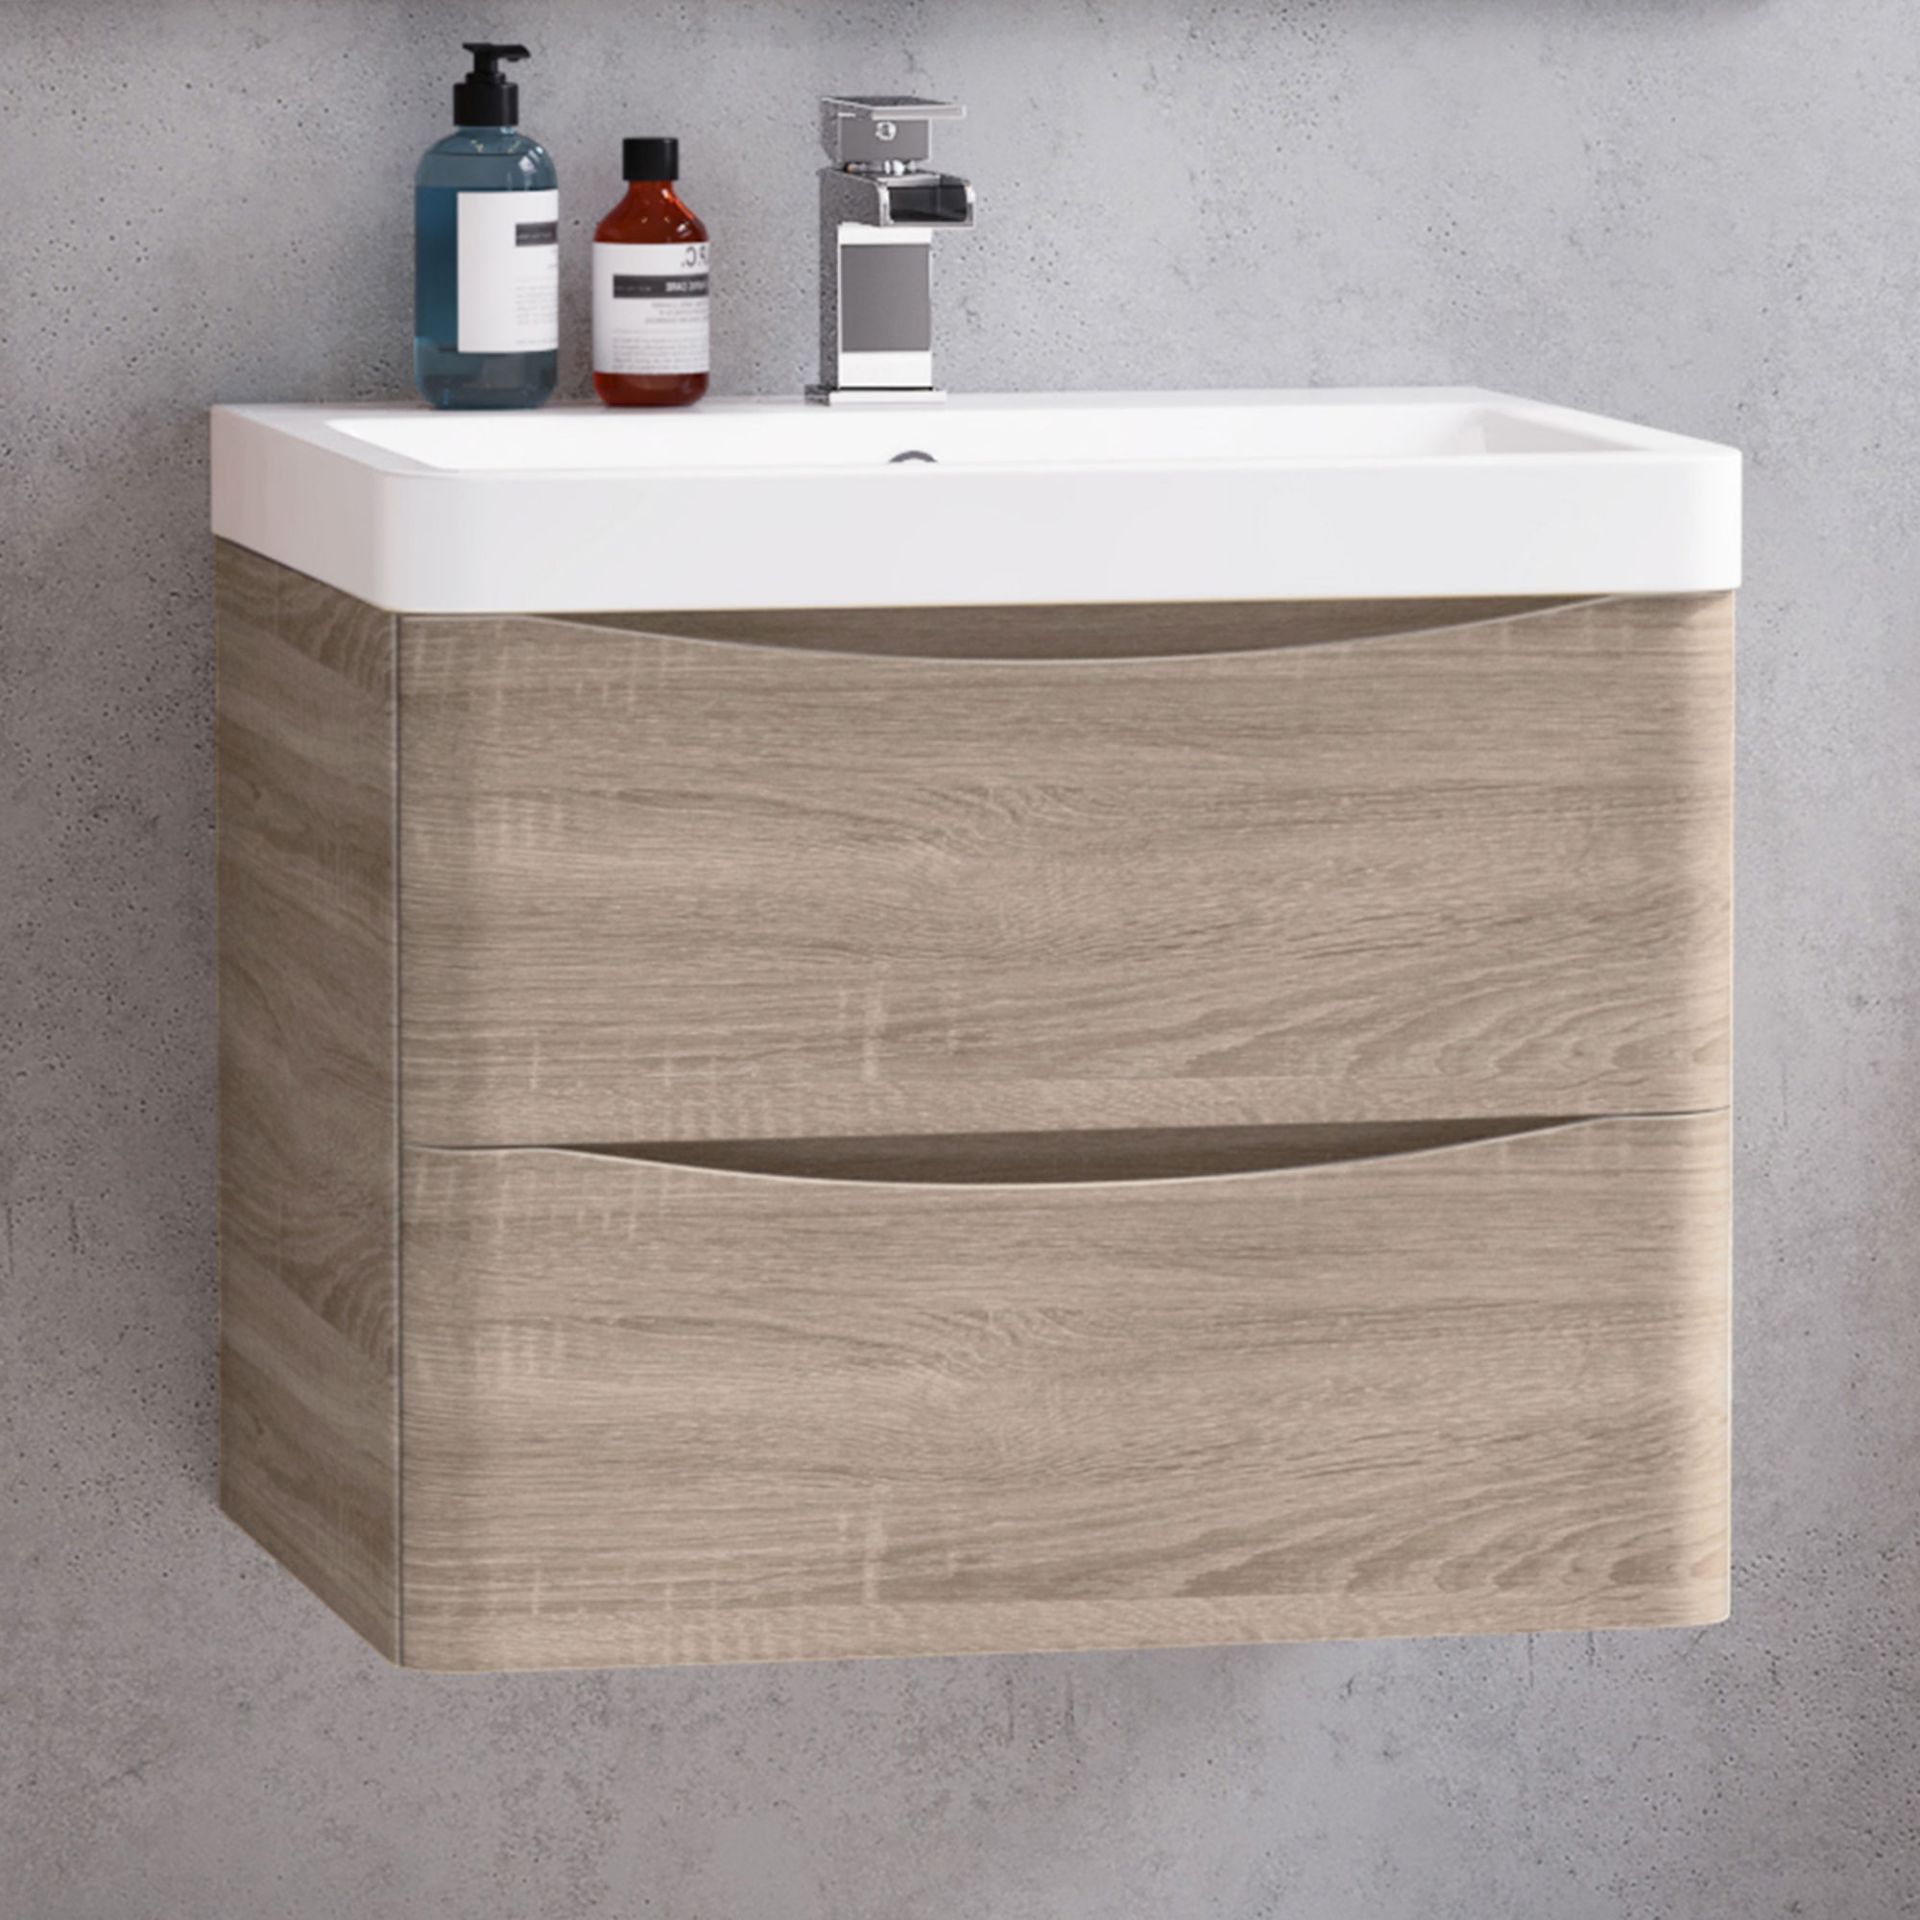 NEW & BOXED 600mm Austin II Light Oak Effect Built In Sink Drawer Unit - Wall Hung. RRP ... - Image 3 of 3